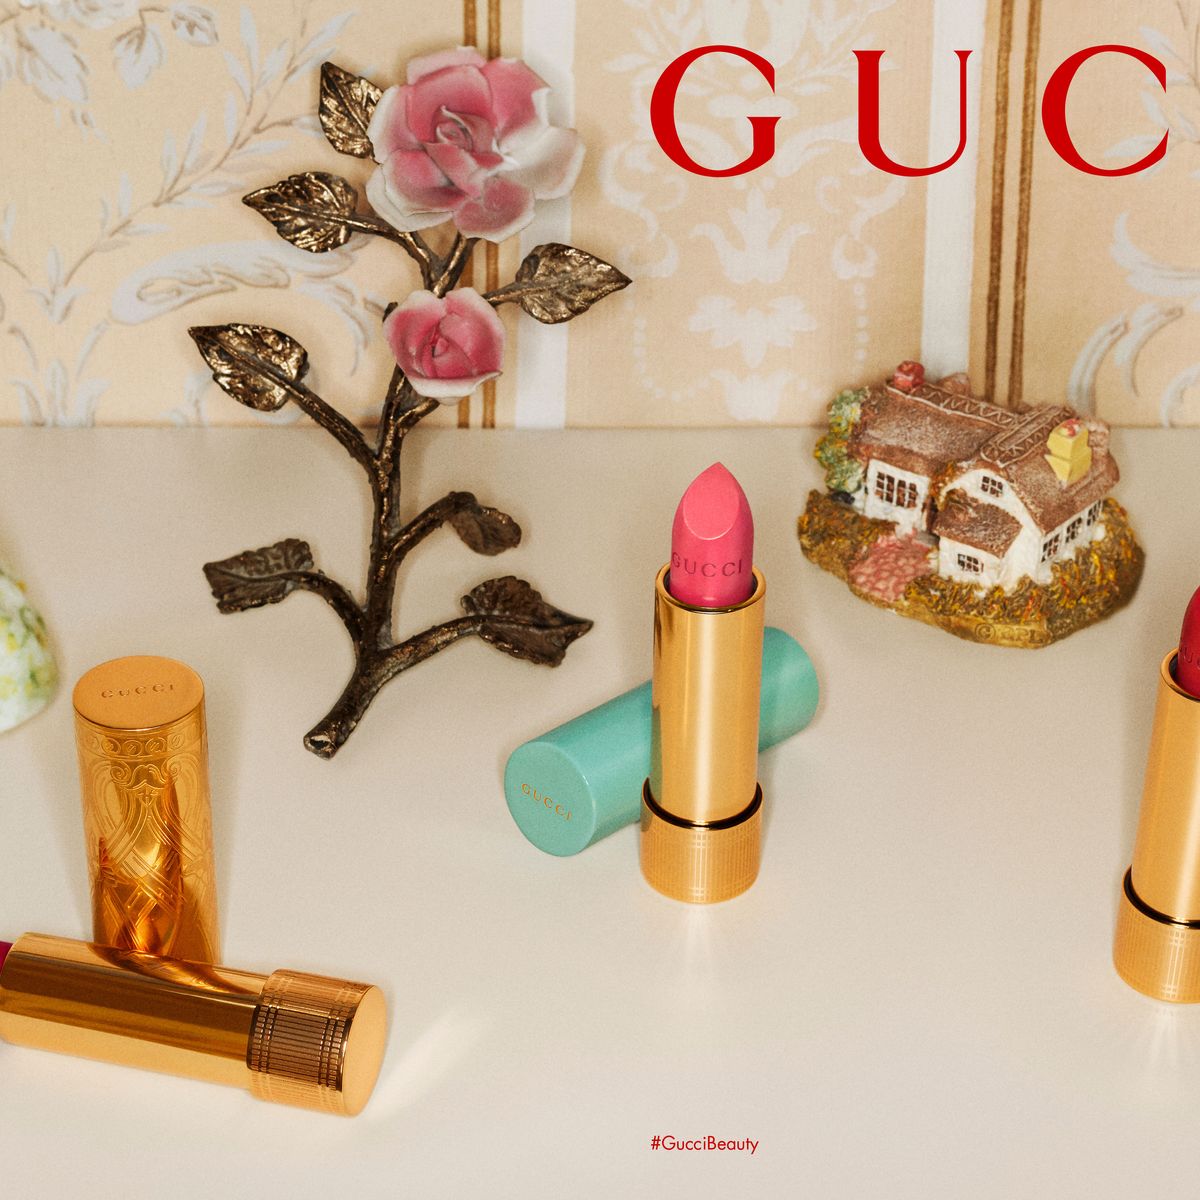 Stramme farligt Ældre Multiple Reviews with Pictures: Gucci Beauty's New Lipsticks